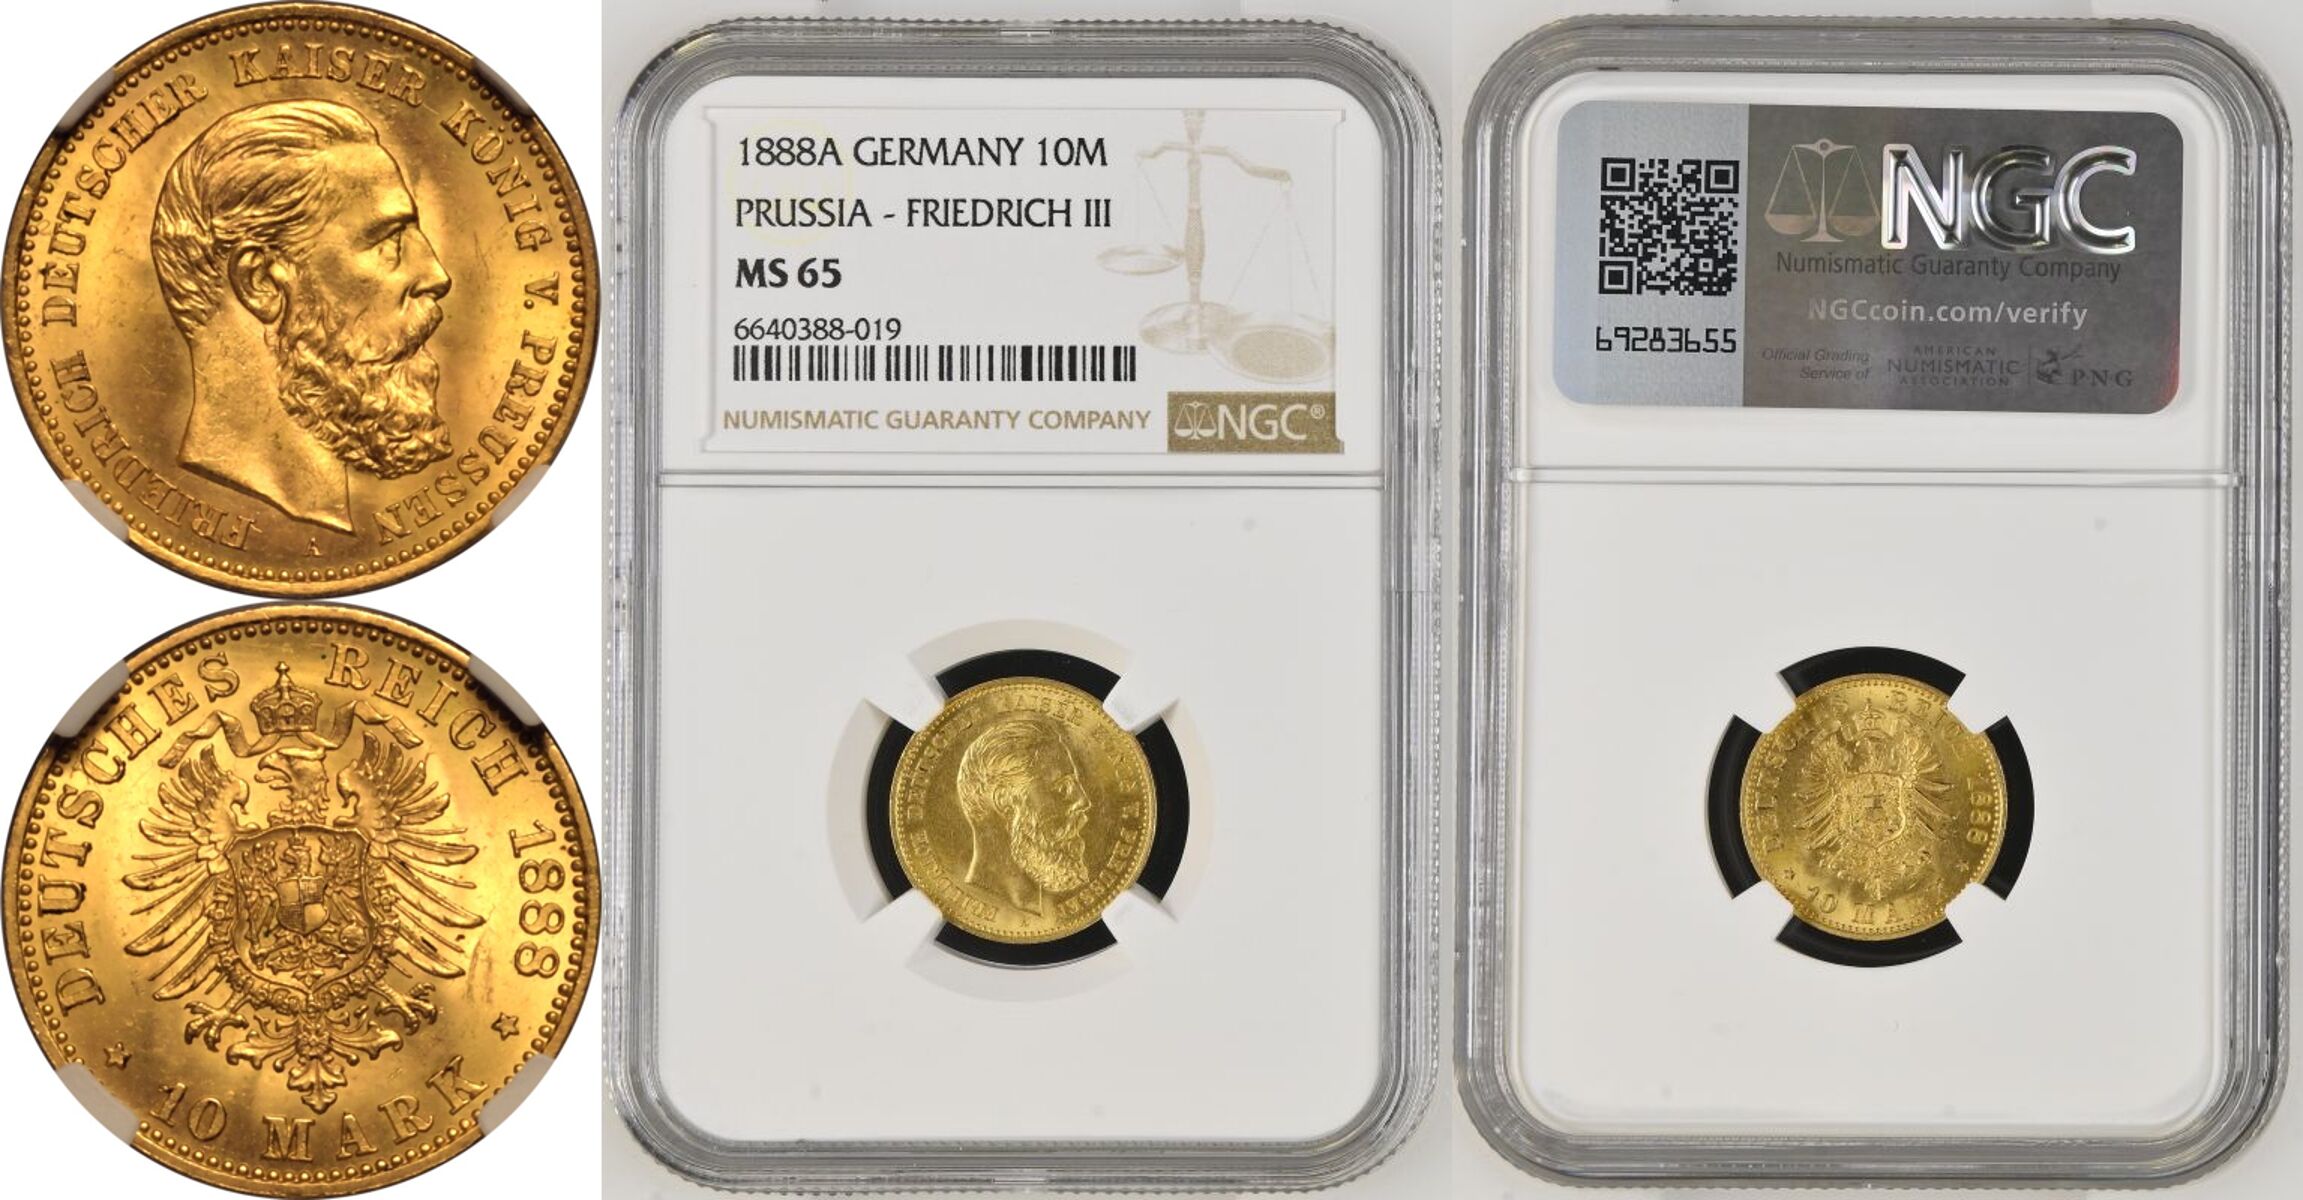 Germany: Prussia 1888 A Gold 10 Mark Friedrich III NGC MS 65 - Image 7 of 7